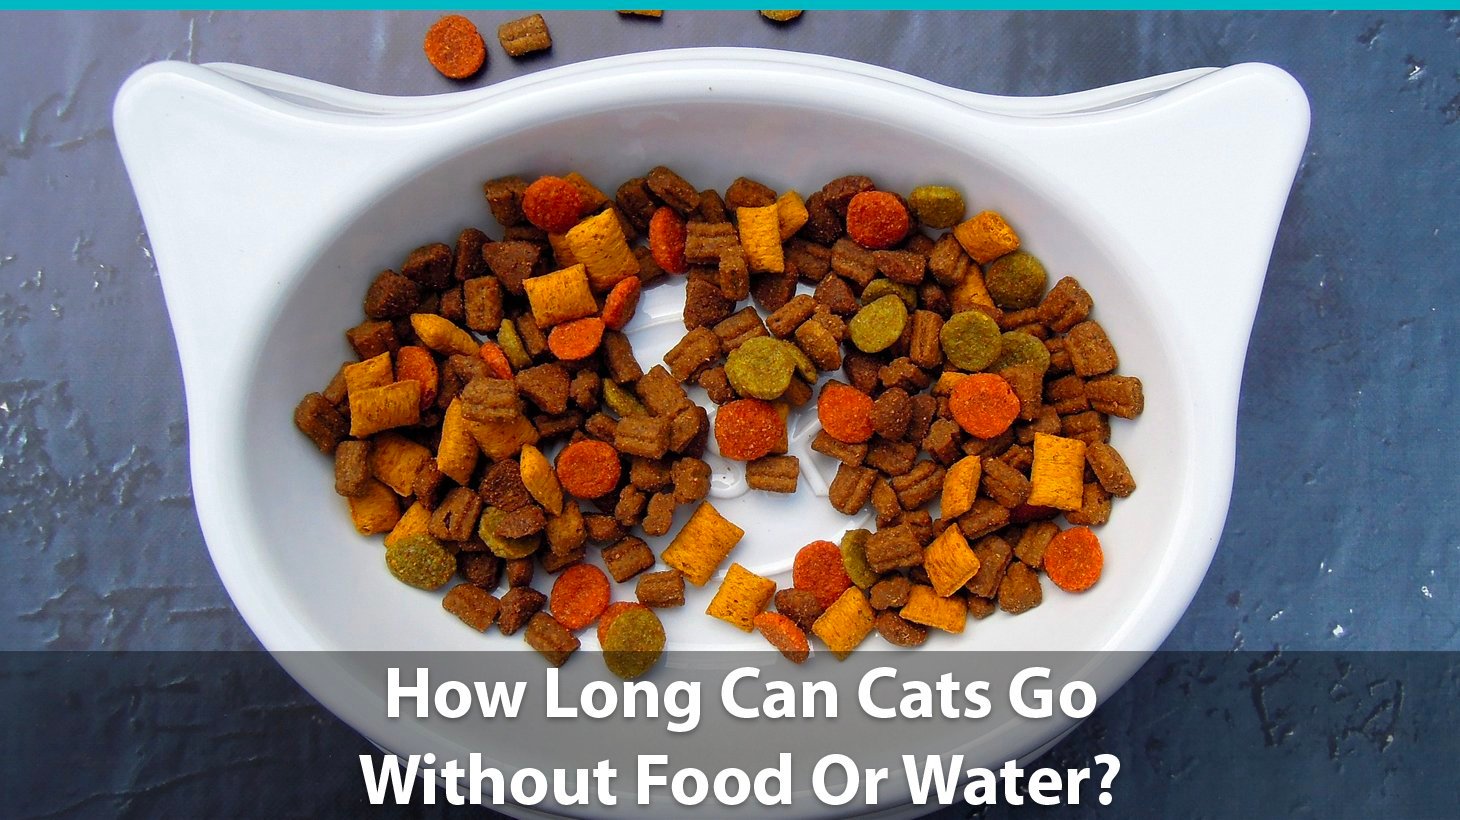 How long can a cat go without food or water?